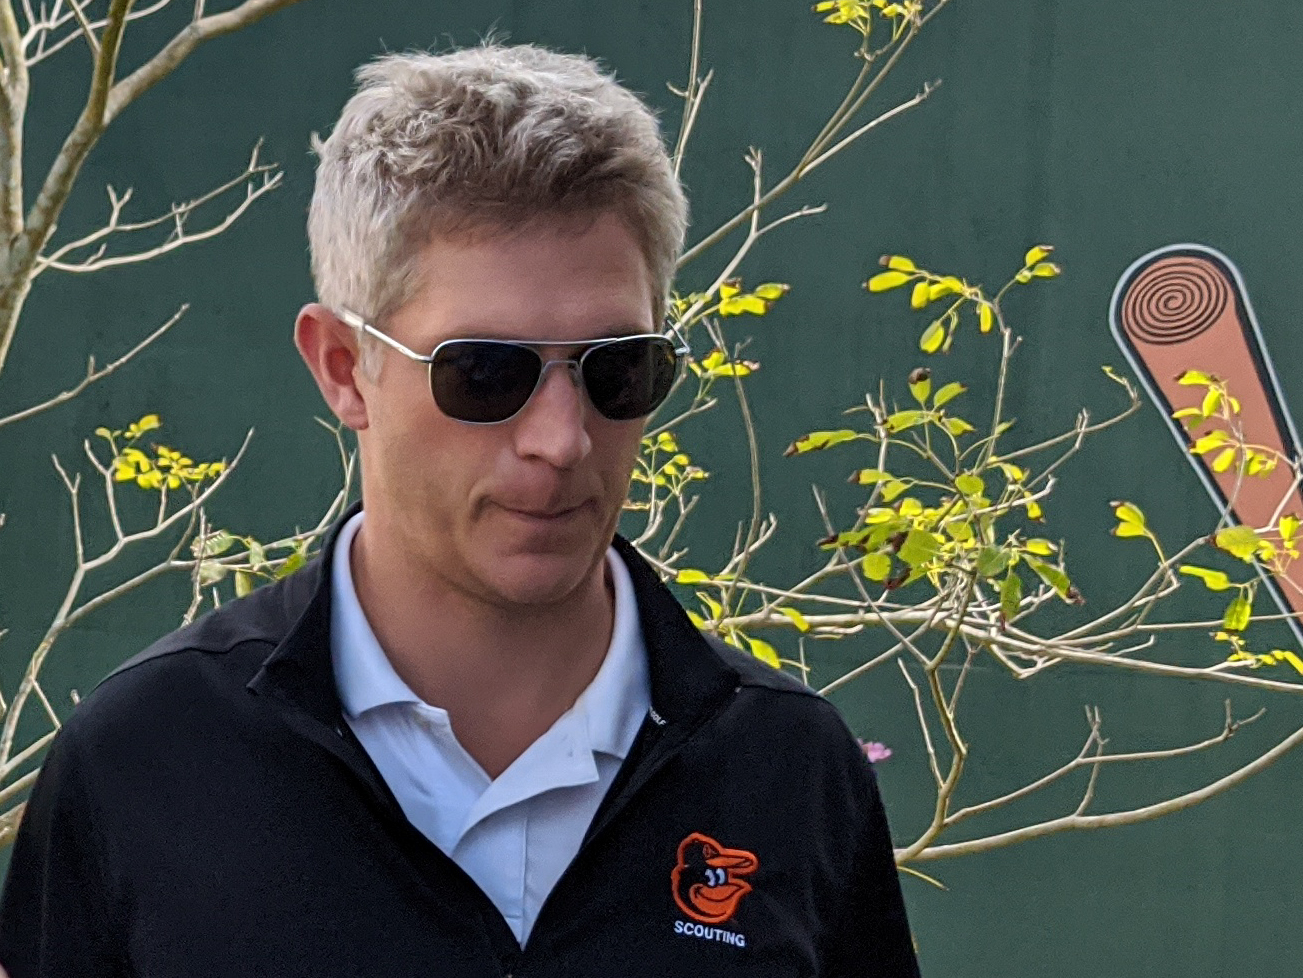 Baltimore Orioles Executive Vice President and General Manager Mike Elias said Tuesday  the club is focused on developing individual players in 2020.